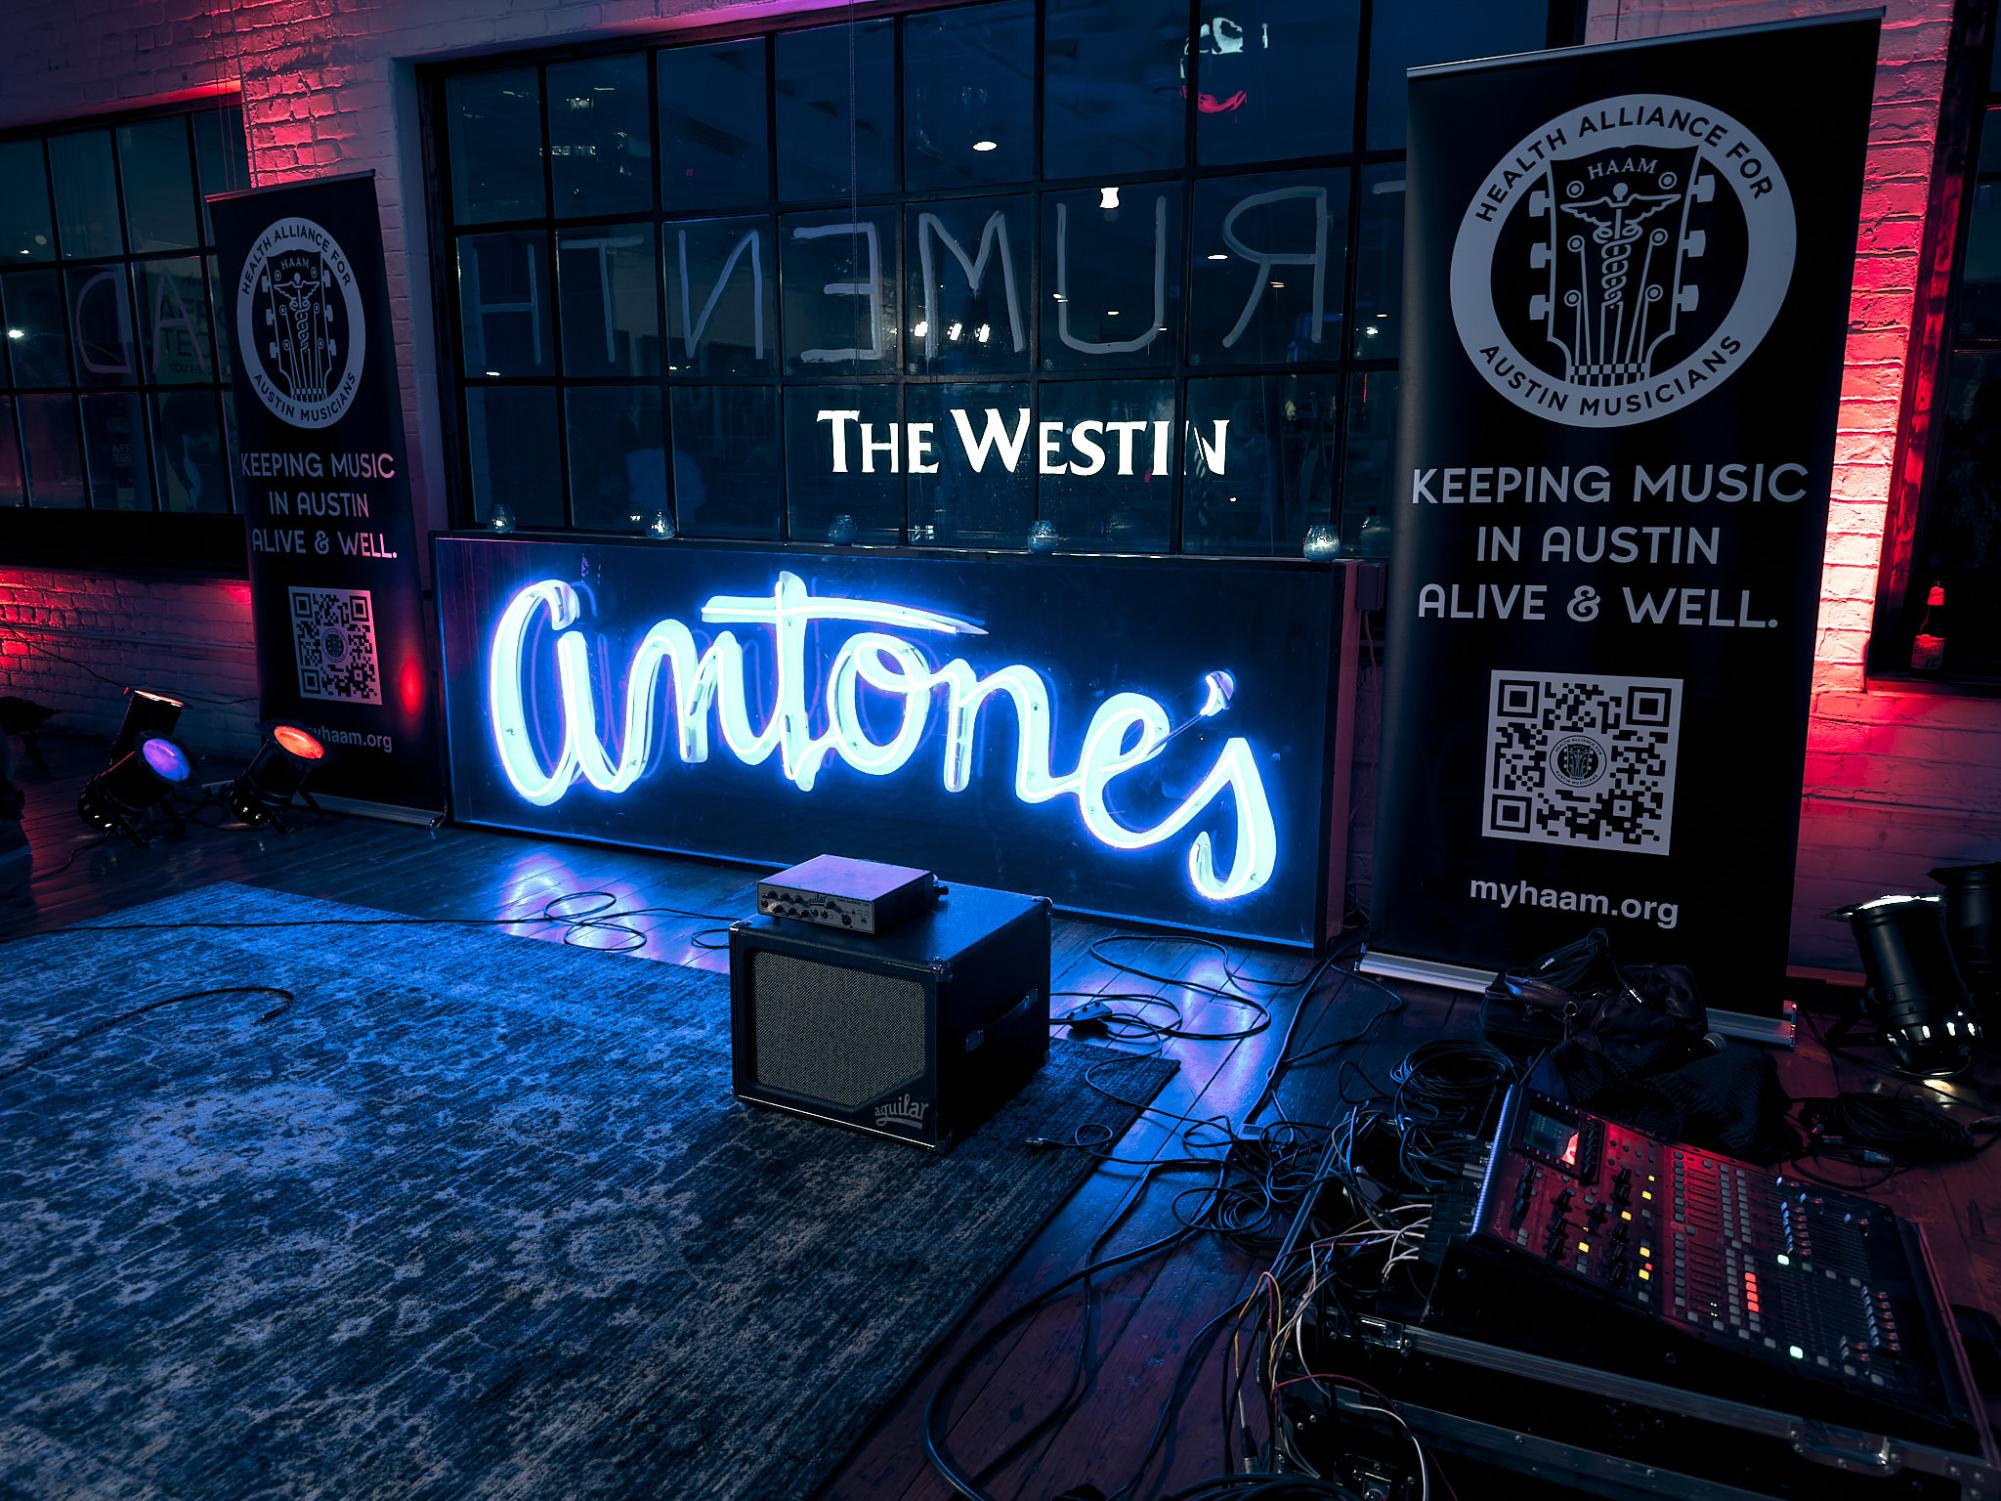 Despite moving locations since its start in 1975, Antones continues to attract musicians and music lovers alike. This iconic piece of blues history here in Austin hosted Michael Weintrobs Instrumenthead Invasion gallery from Nov. 2 through Nov. 6. As part of the gallerys immersive experience, various musicians, including the Soul Supporters, Natalie Price, Gordie Johnson and Matt Hubbard, jammed on a make-shift stage throughout the exhibition. The stage itself had a simple setup: a couple amps, cords running around a patterned rug and a neon blue light spelling out Antones in the background.